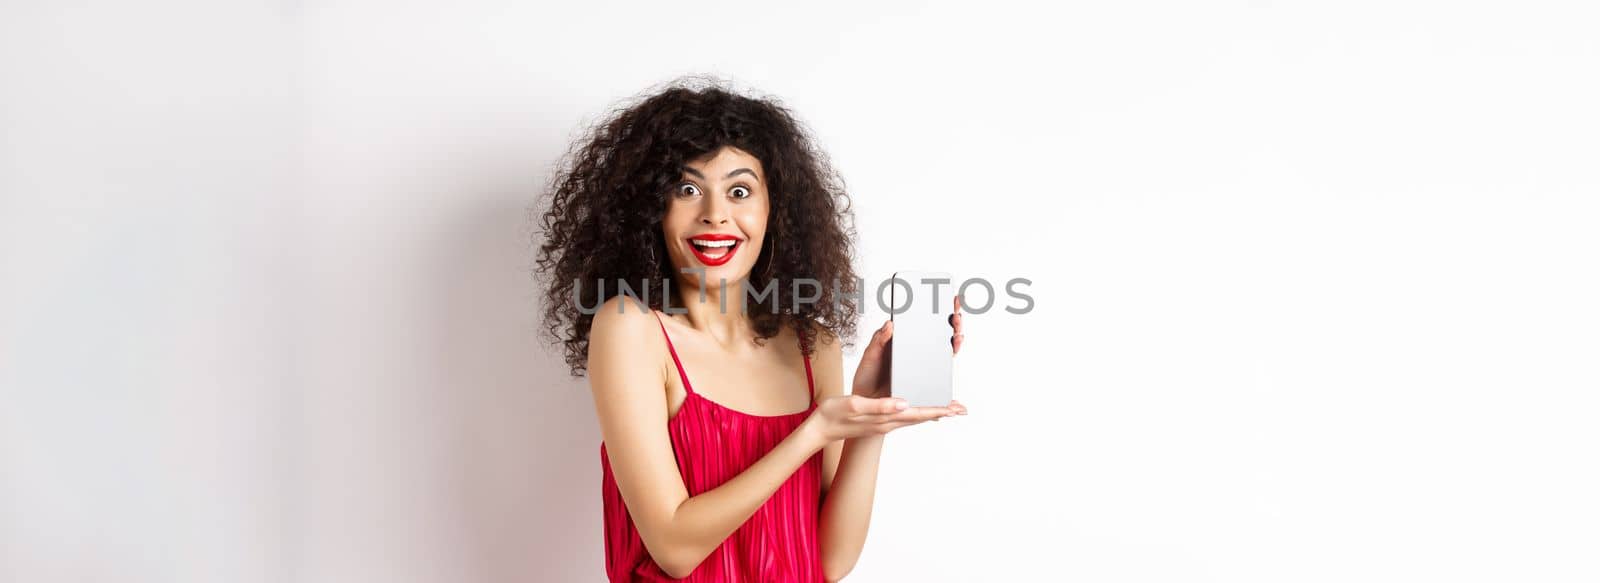 Fashionable lady in red dress and makeup, showing mobile phone screen and smiling, introduce smartphone application, standing over white background.